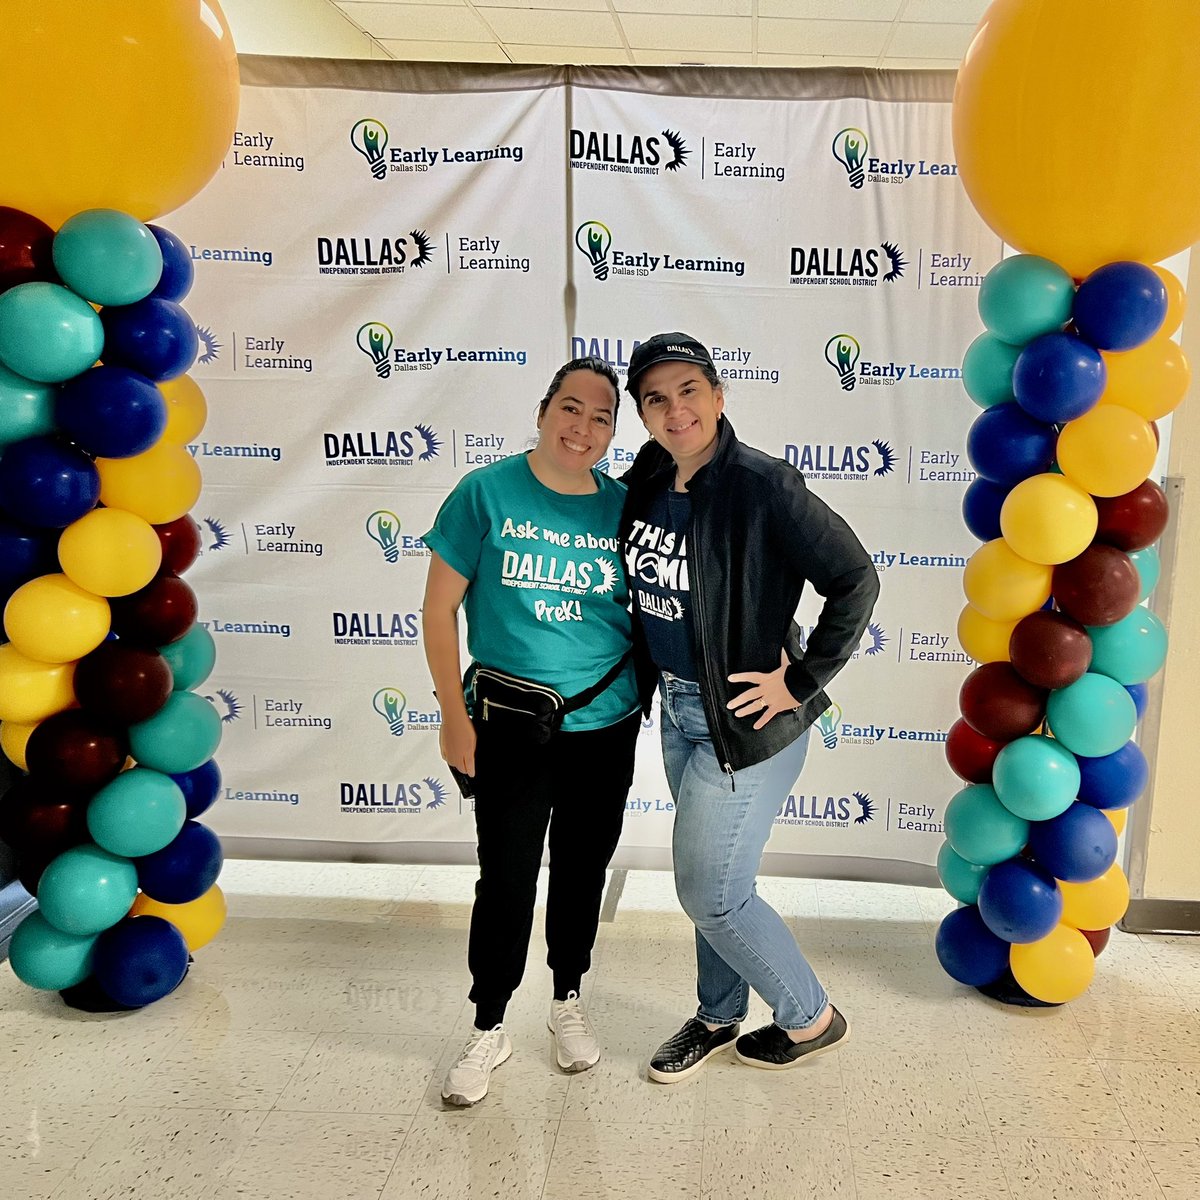 Birthday weekend for Principal Molinares started doing what she loves the most! Greeting and connecting with families! Thank you @YCardozaRamirez for hosting today a very special event! The ☔️ did not stopped us! @DrElenaSHill @StellaKastl @MurilloDebbie1 @Dallasacademics